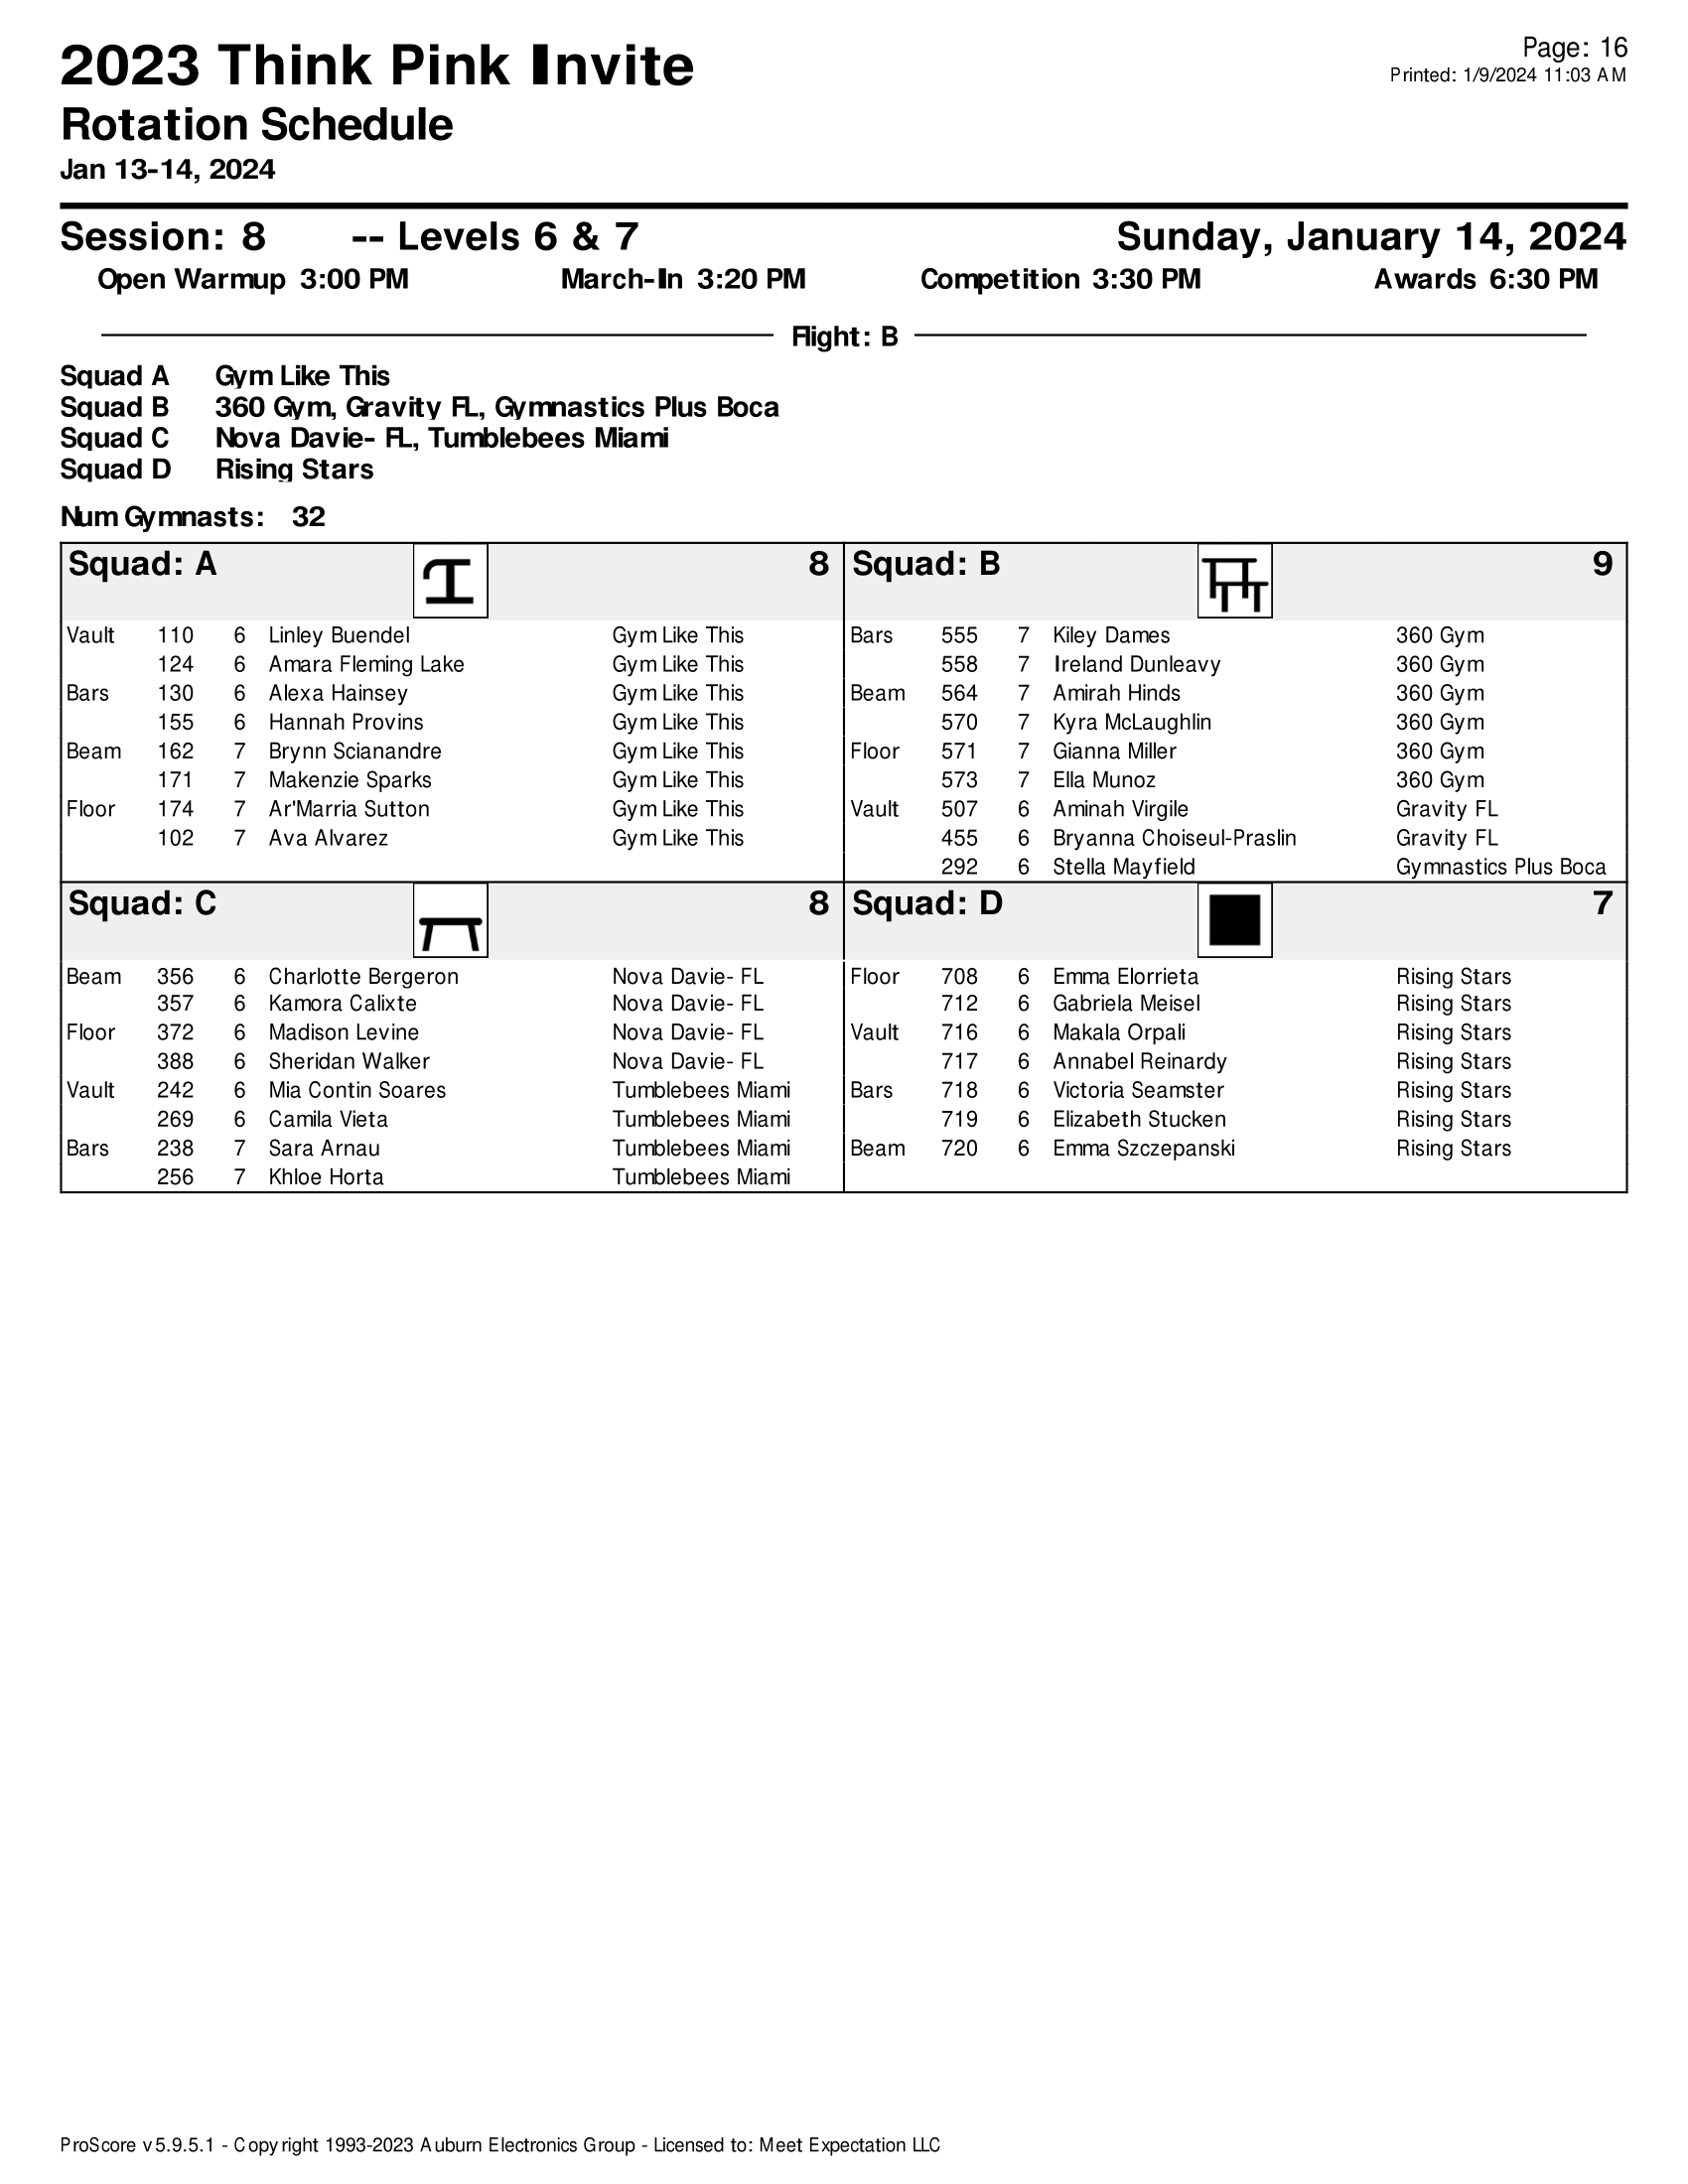 Rotation Sheets updated-16